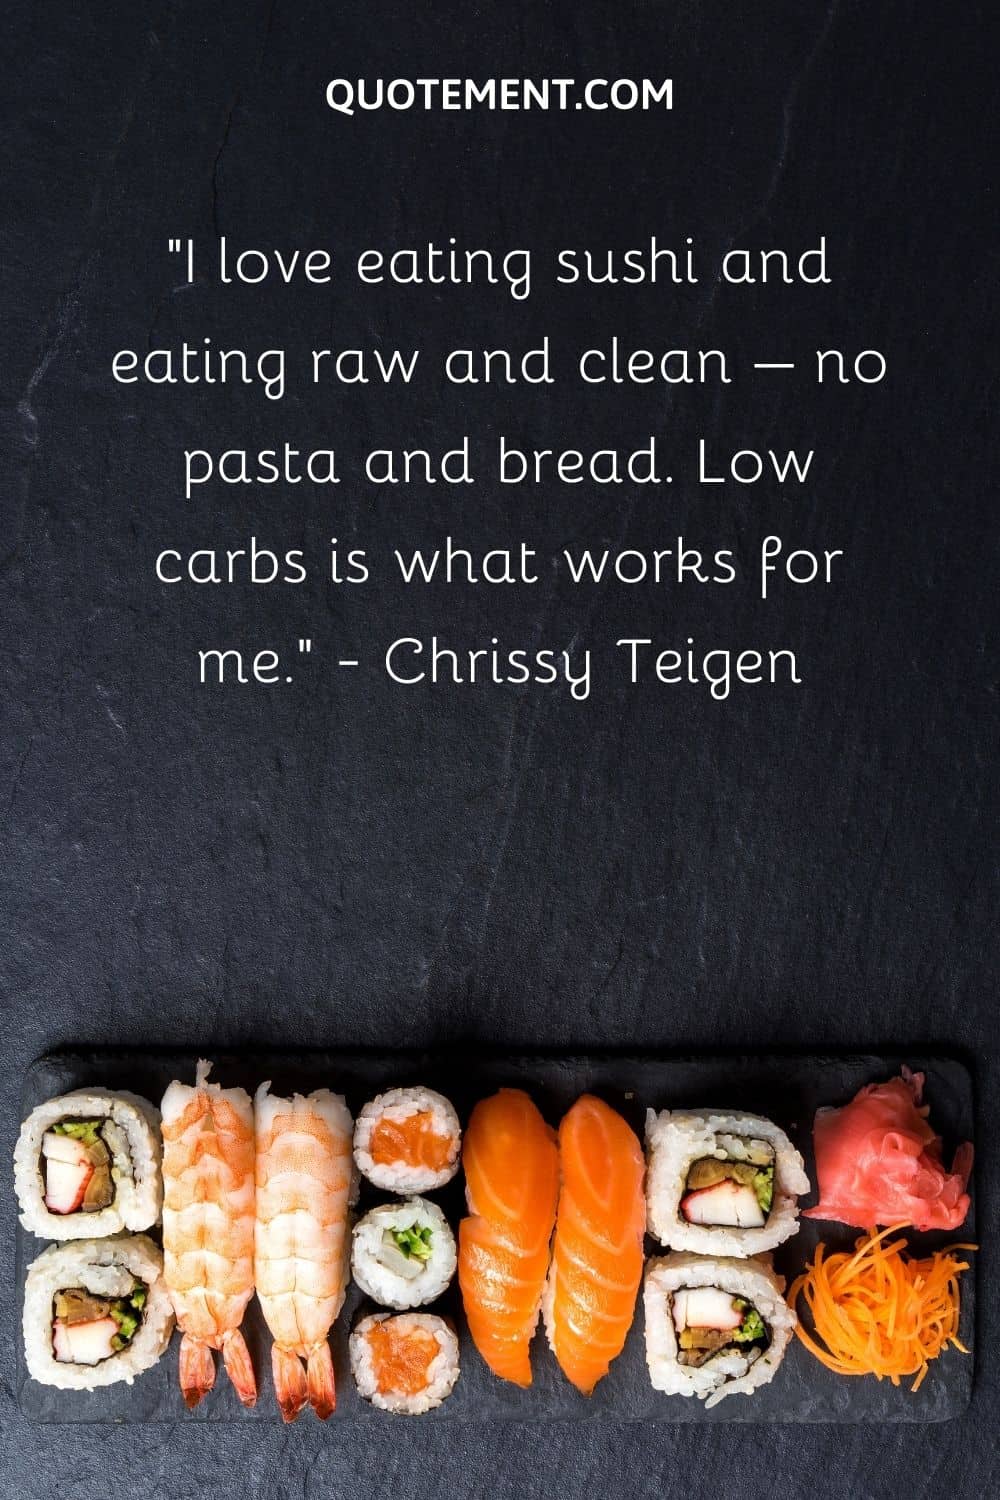 I love eating sushi and eating raw and clean – no pasta and bread. Low carbs is what works for me.